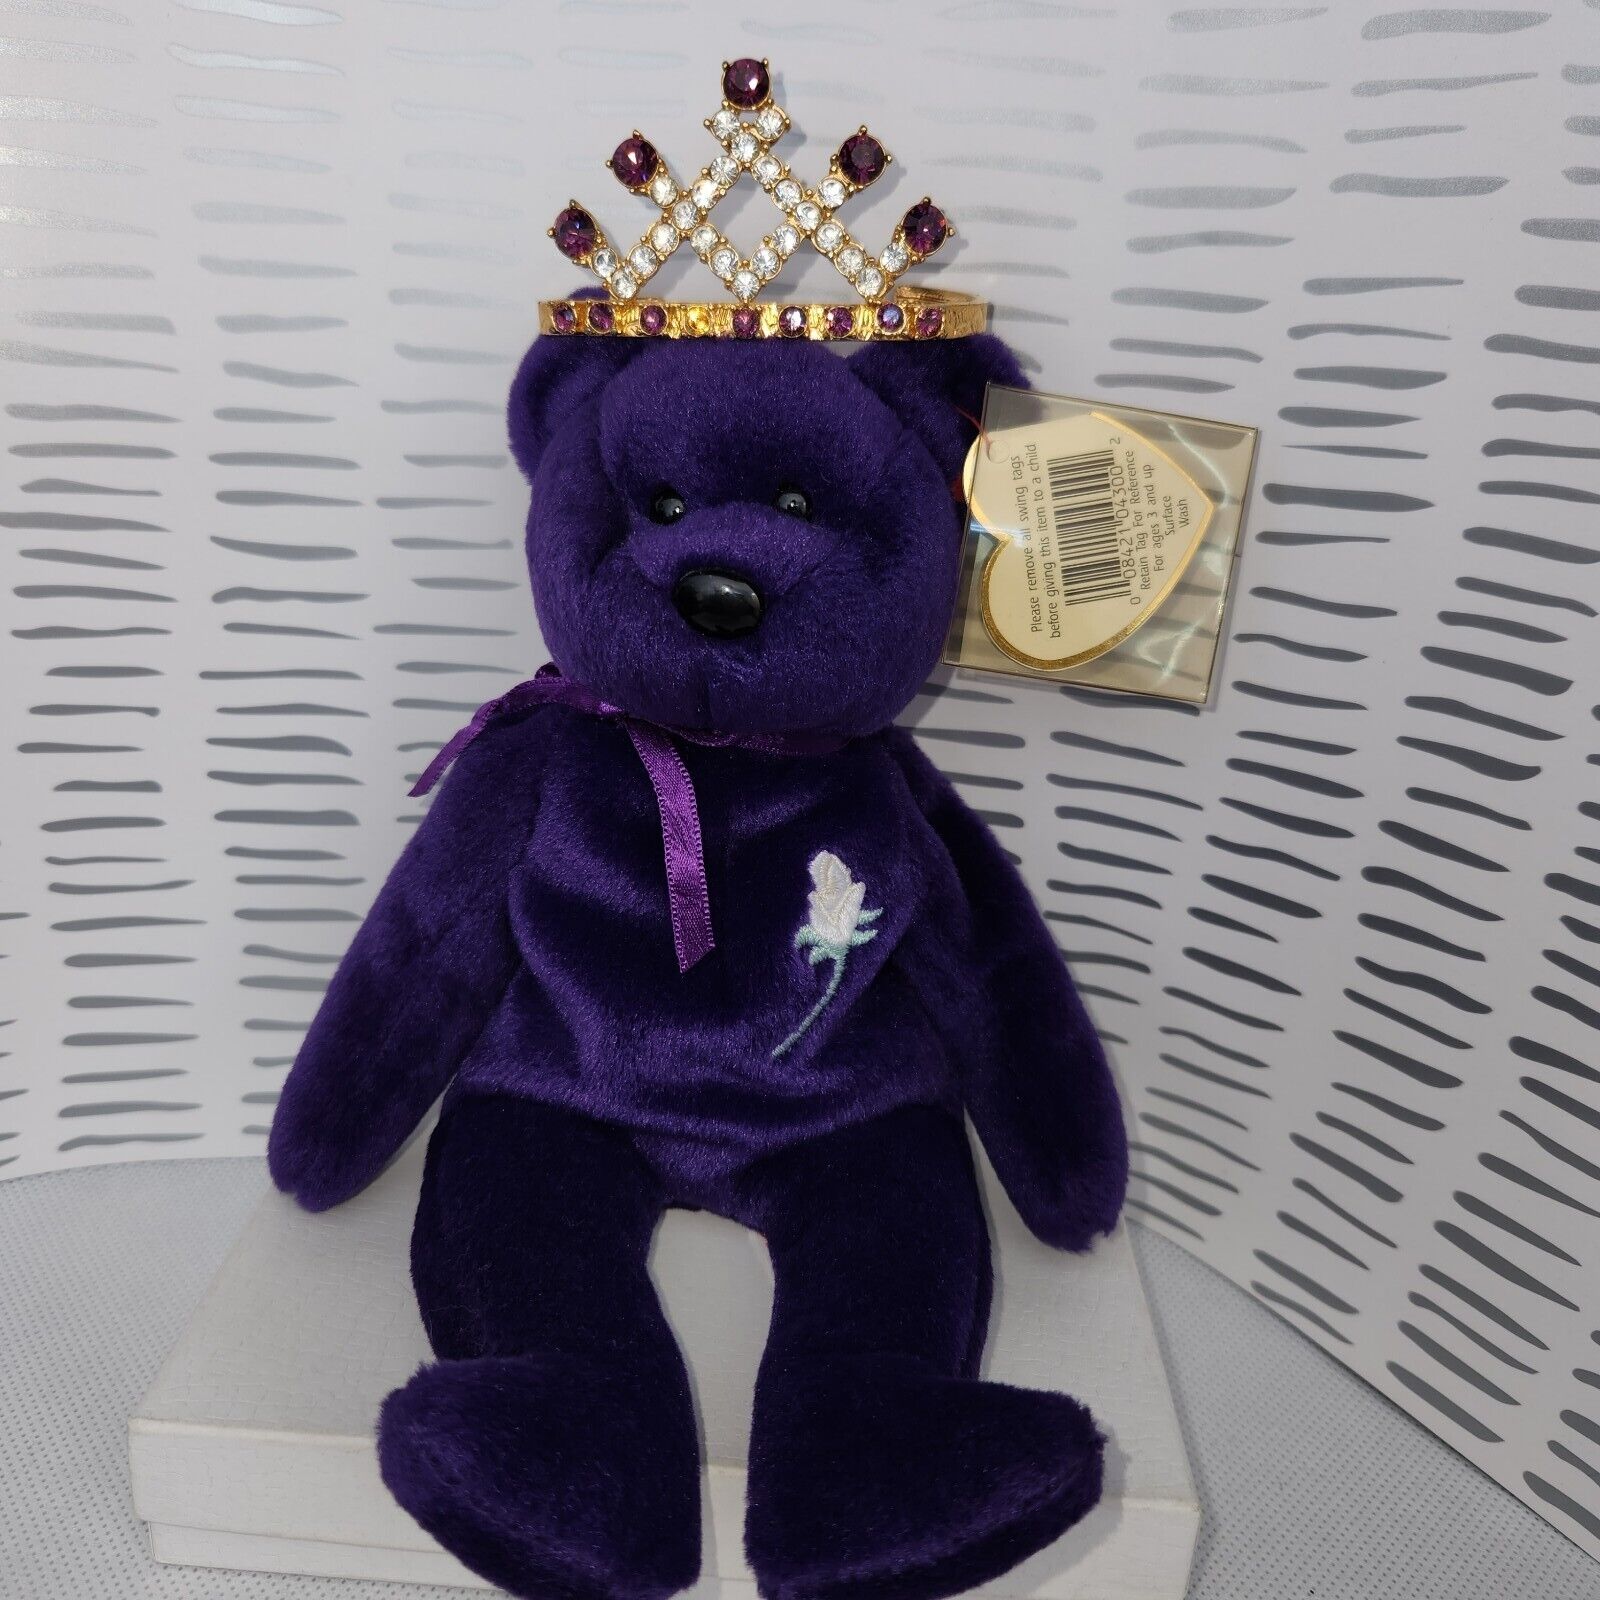 2222, RETIRATED UNIQUE TY 1997 PRINCESS DIANA Beanie Baby 1st Edition WITH CROWN